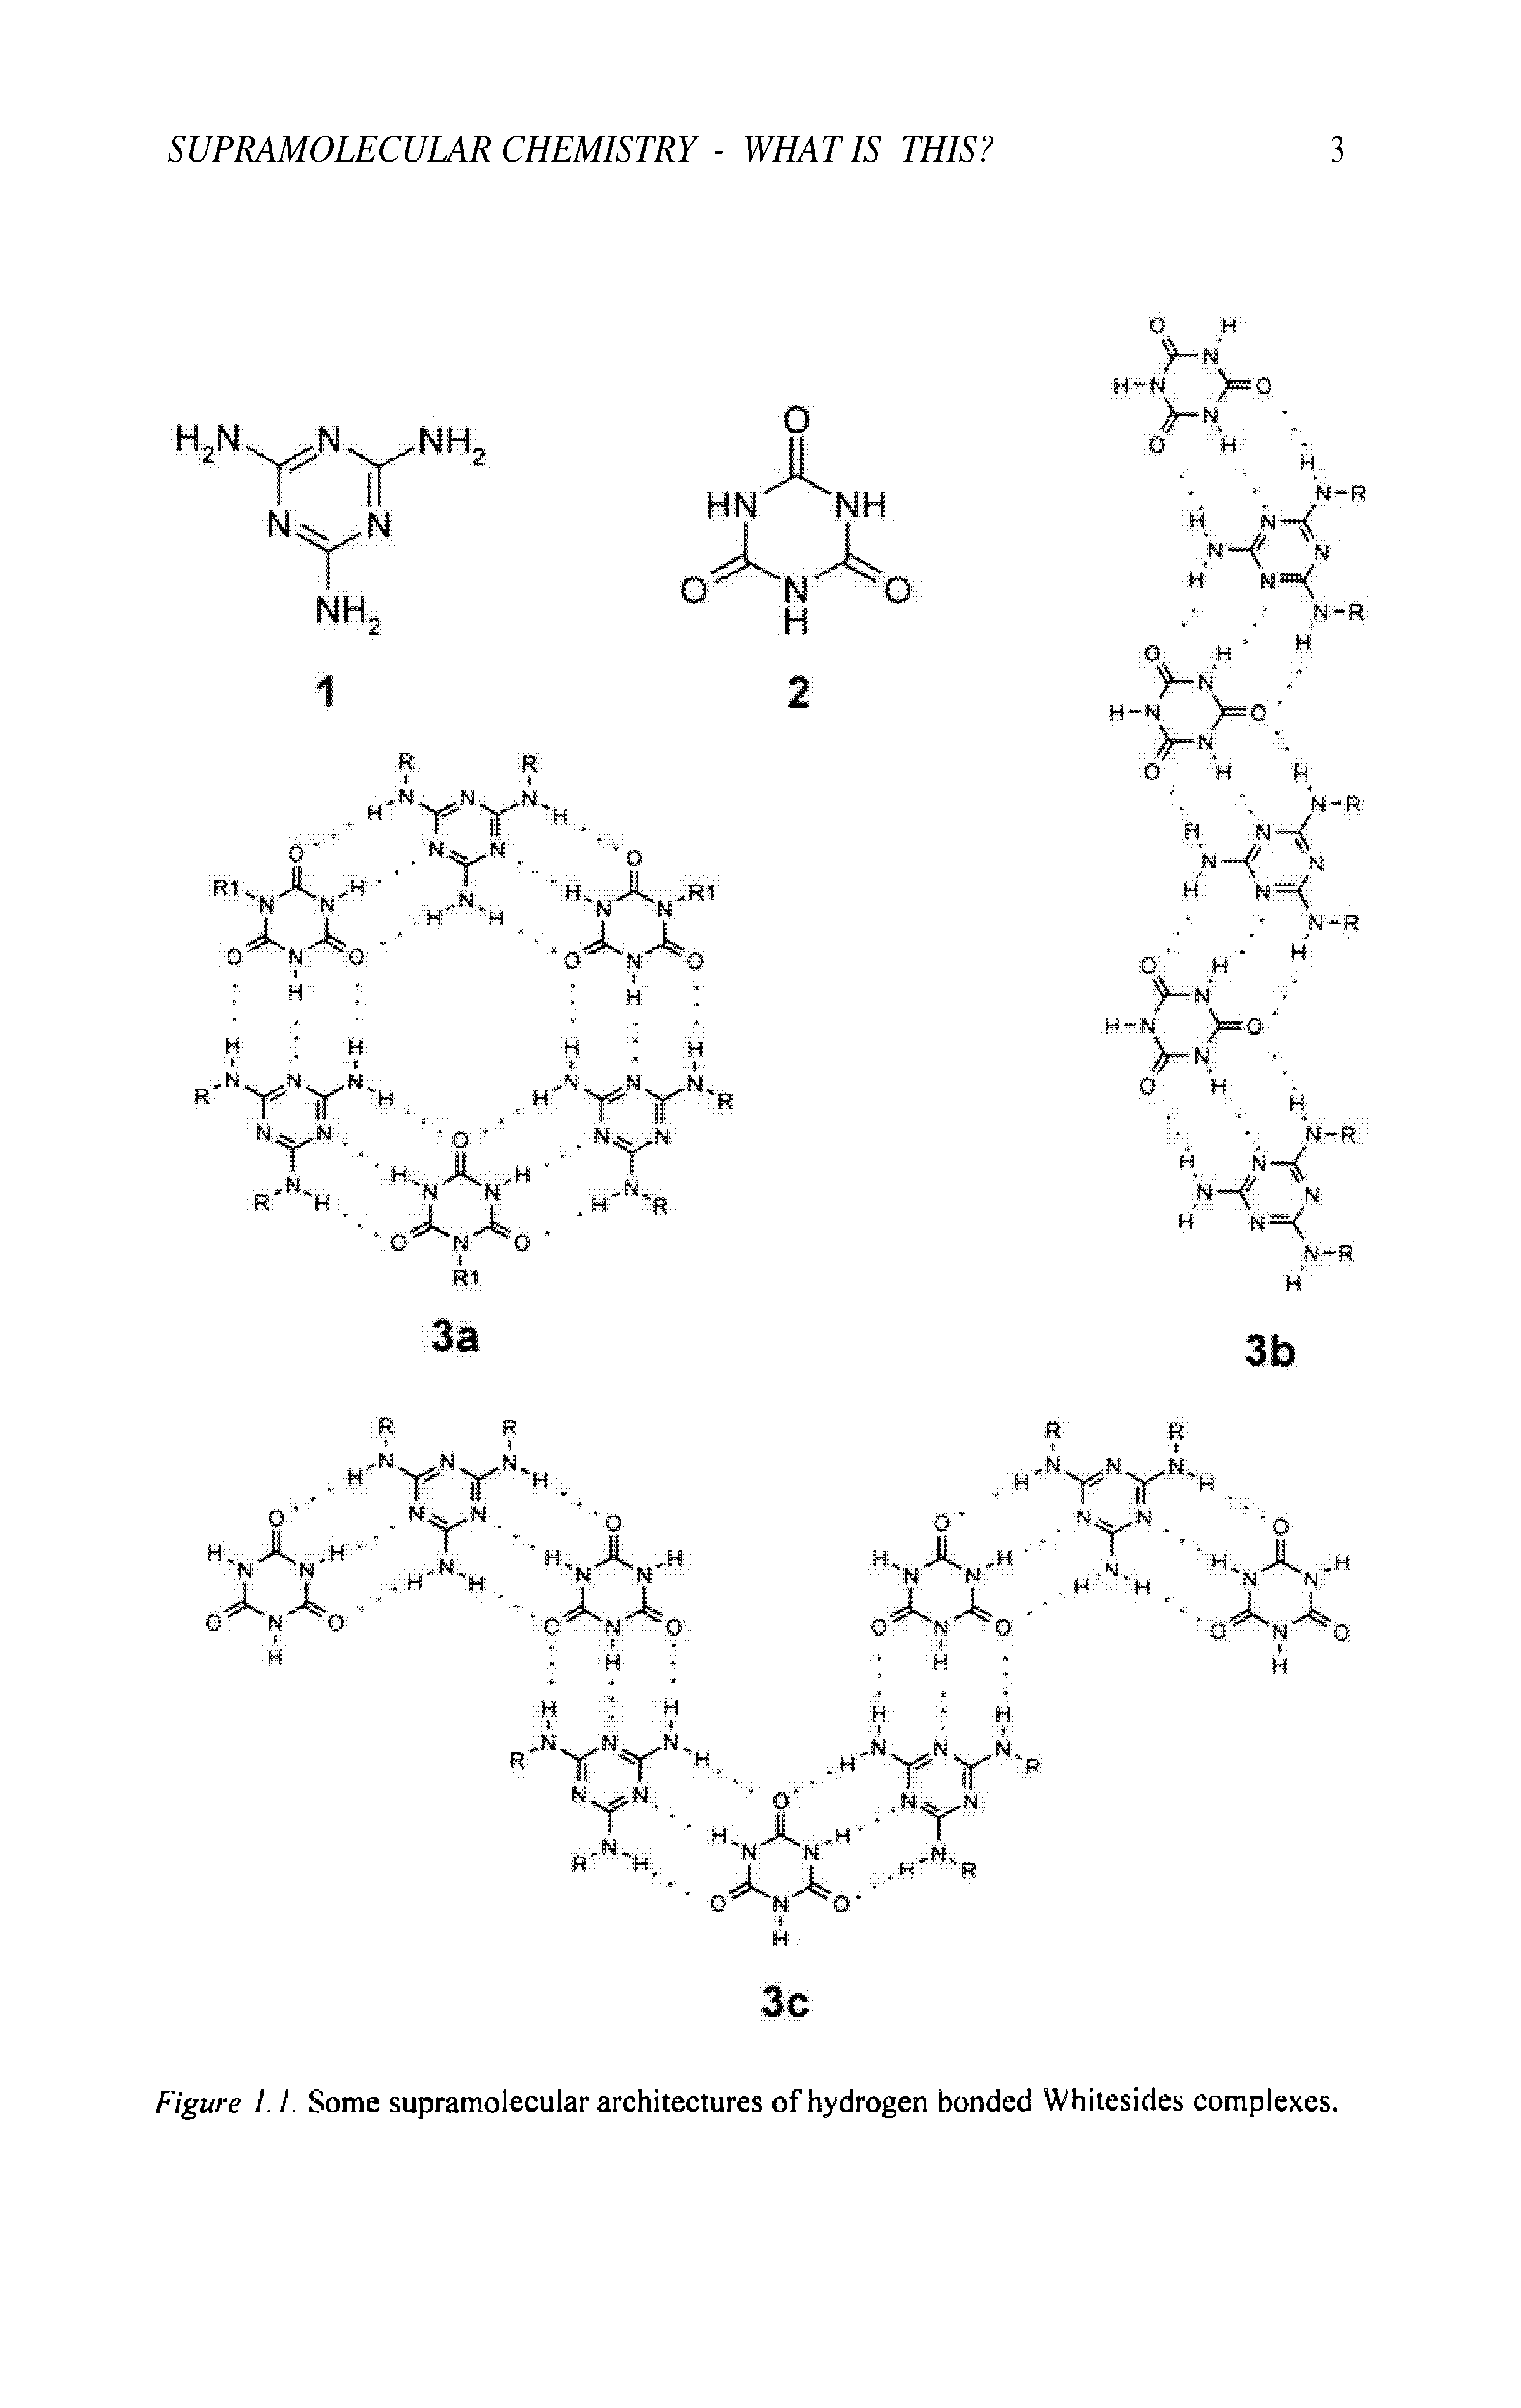 Figure J. 1. Some supramolecular architectures of hydrogen bonded Whitesides complexes.